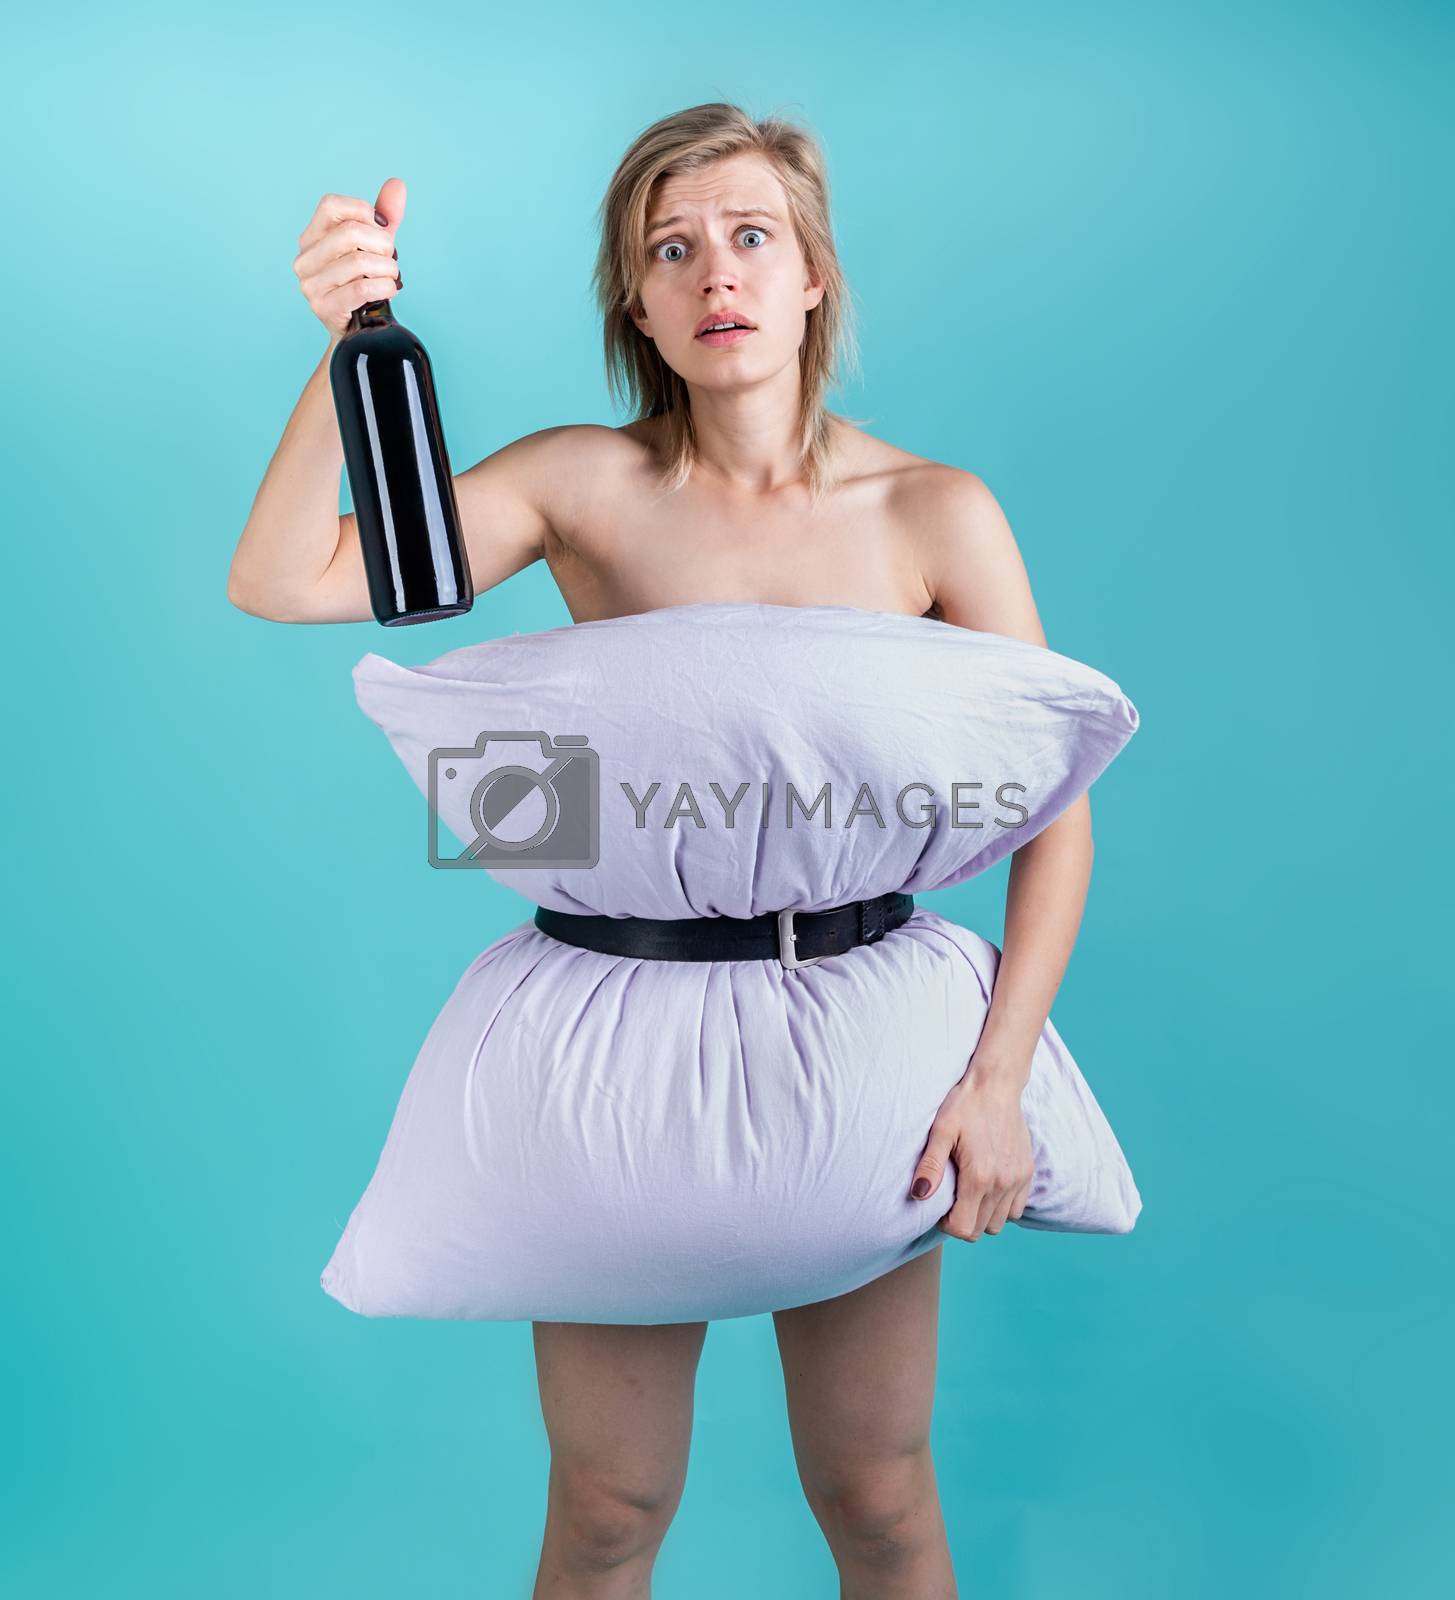 Royalty free image of Desperate woman in pillowdress holding a wine bottle isolated on blue background by Desperada